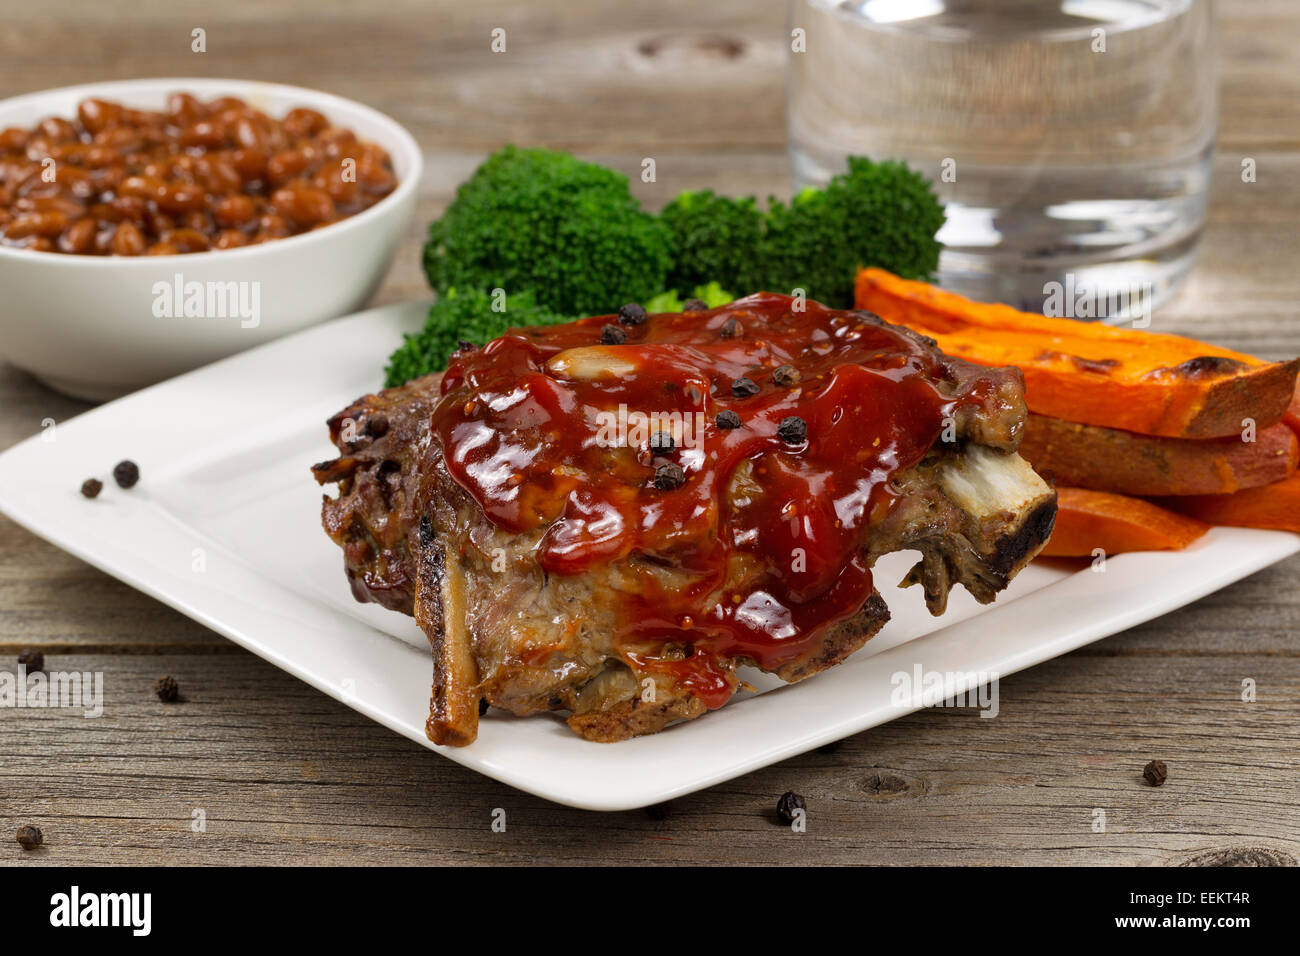 Close up of barbecued spare ribs with yam fries, broccoli, baked beans and glass of water on rustic wooden table. Stock Photo